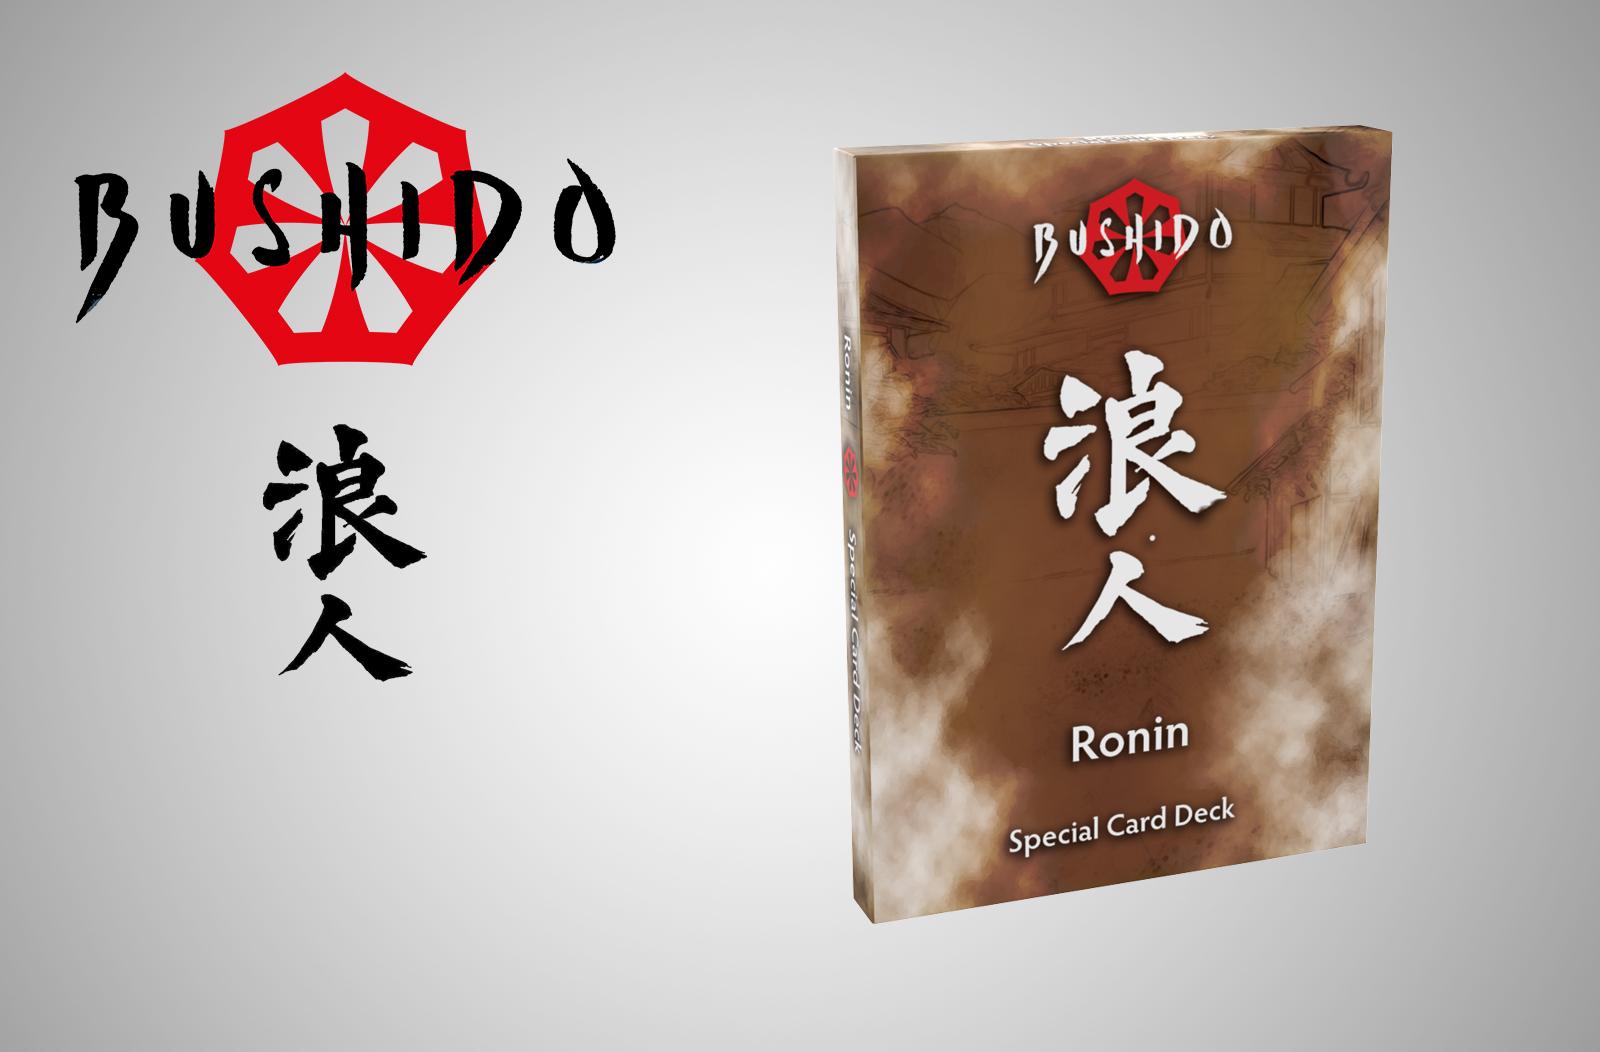 ronin special card deck